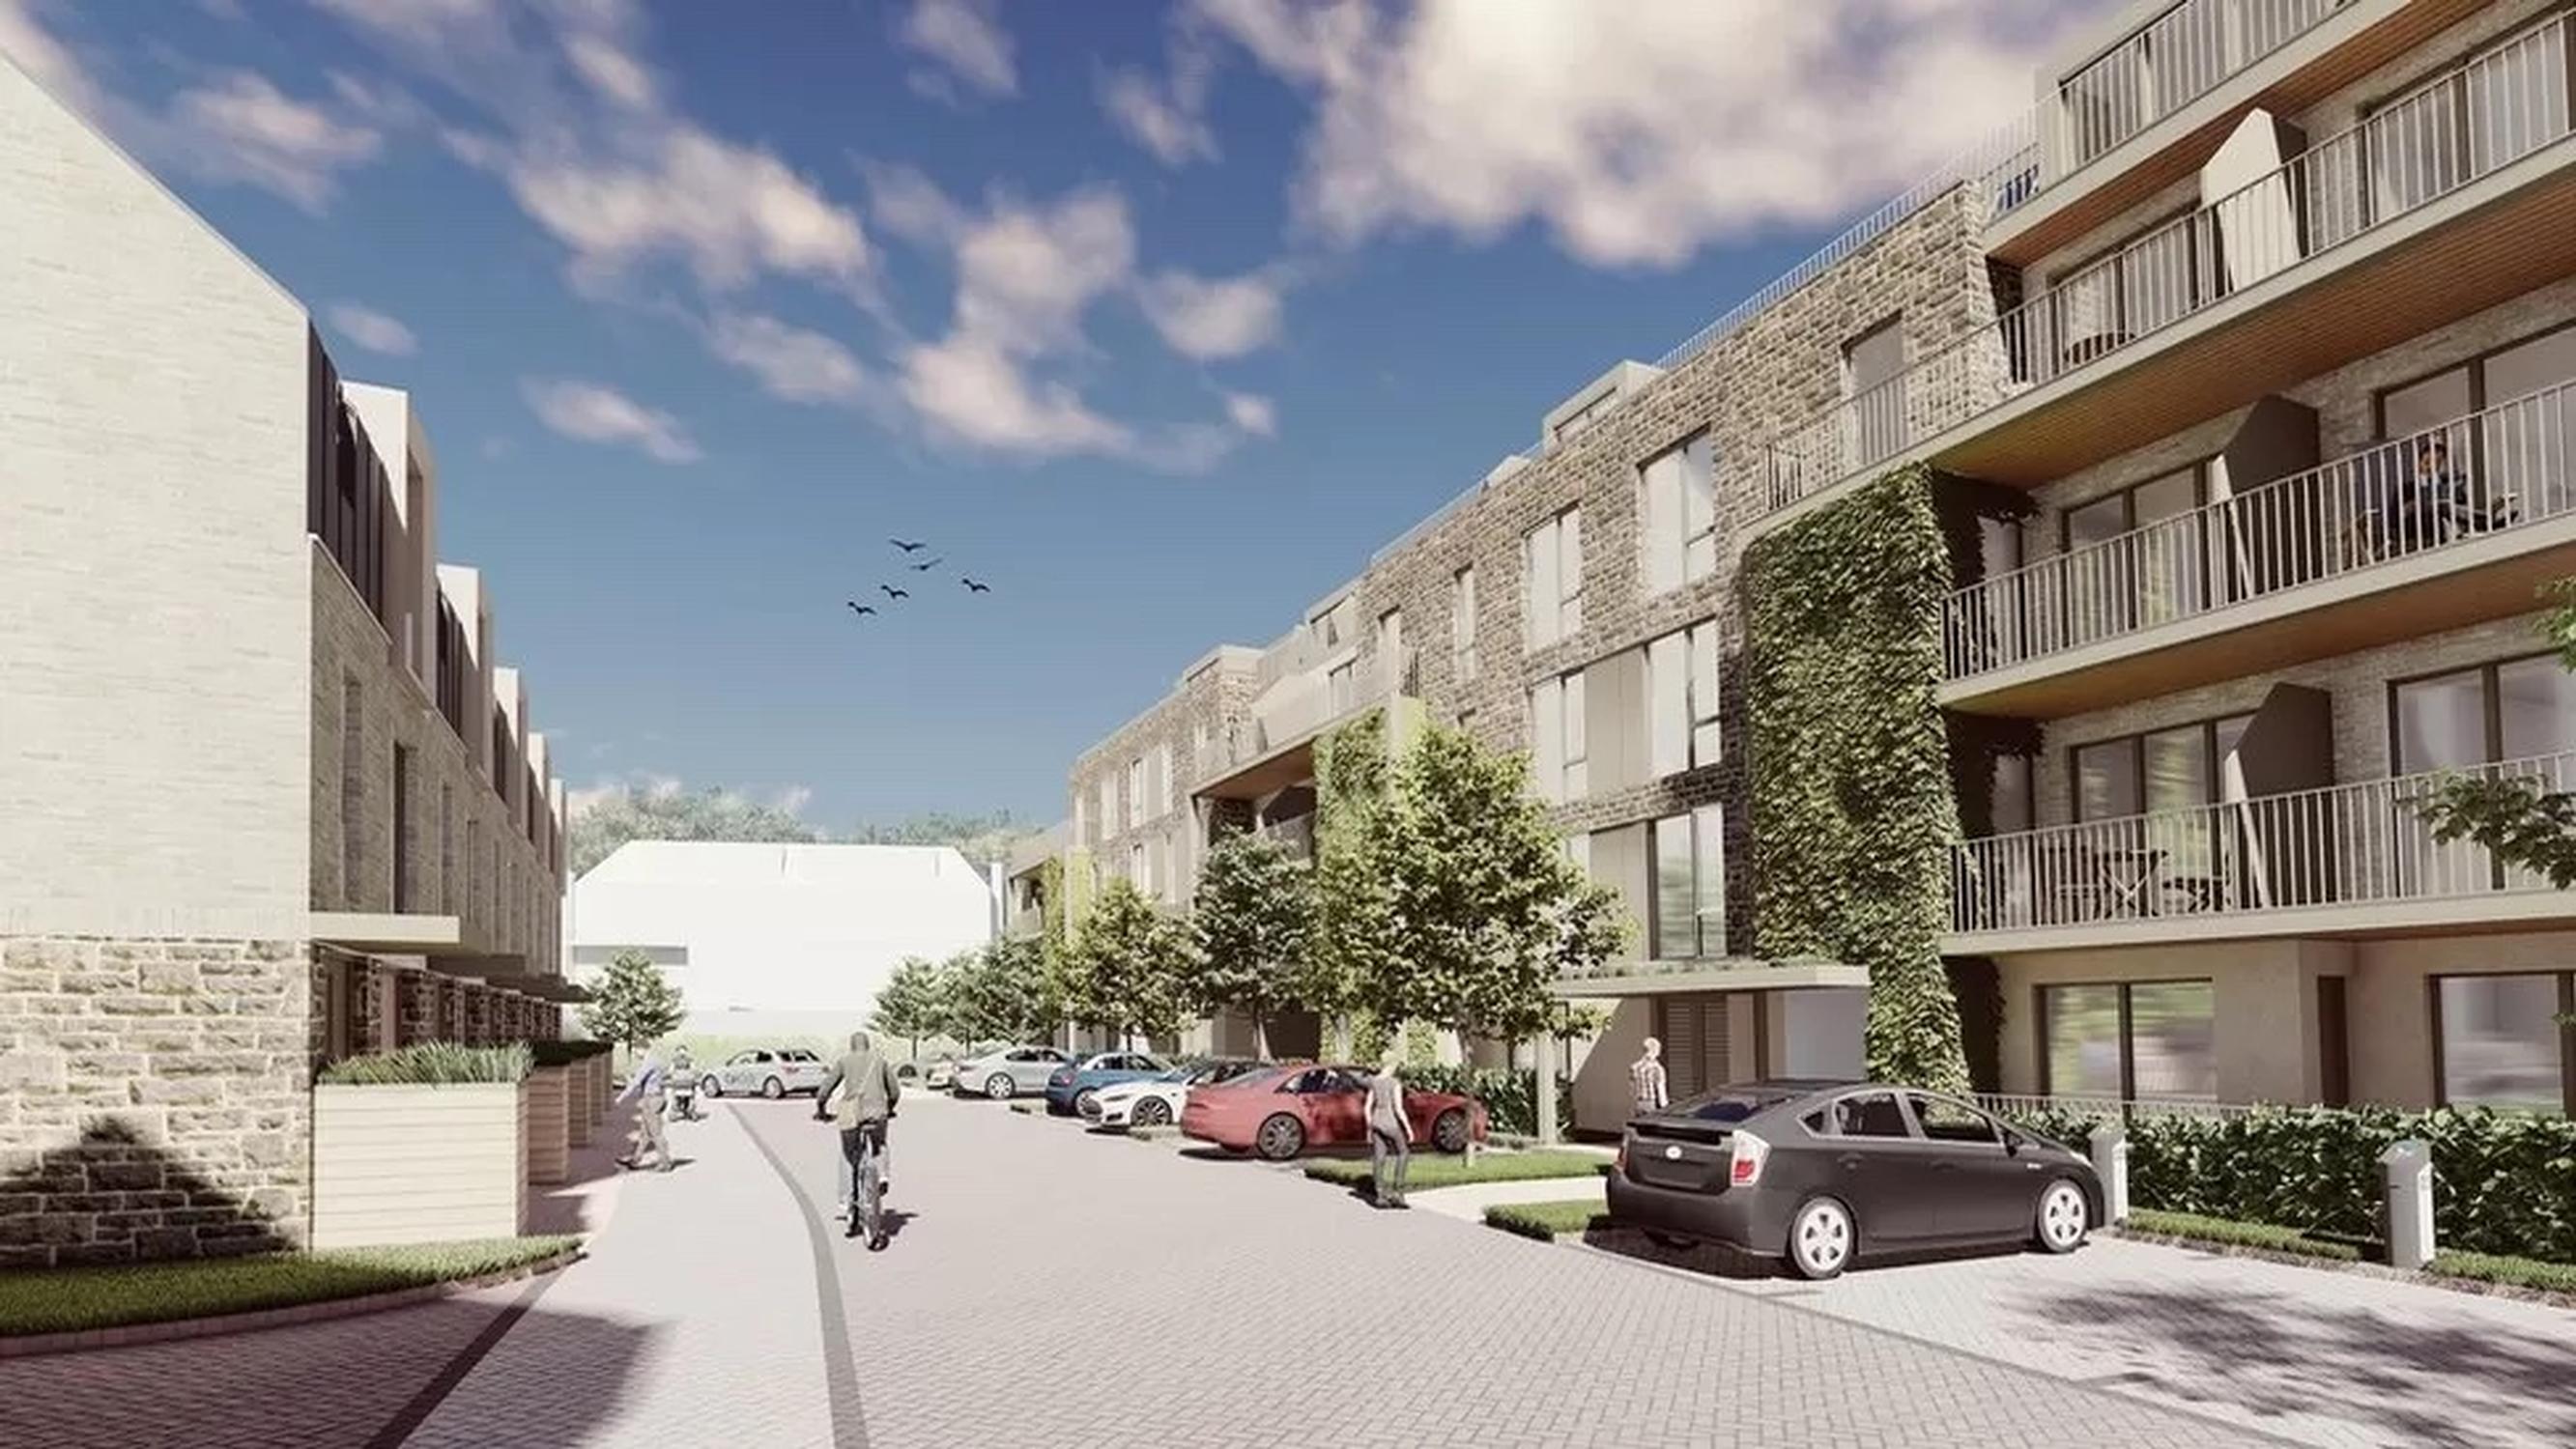 How the West Car Park site will look after redevelopment